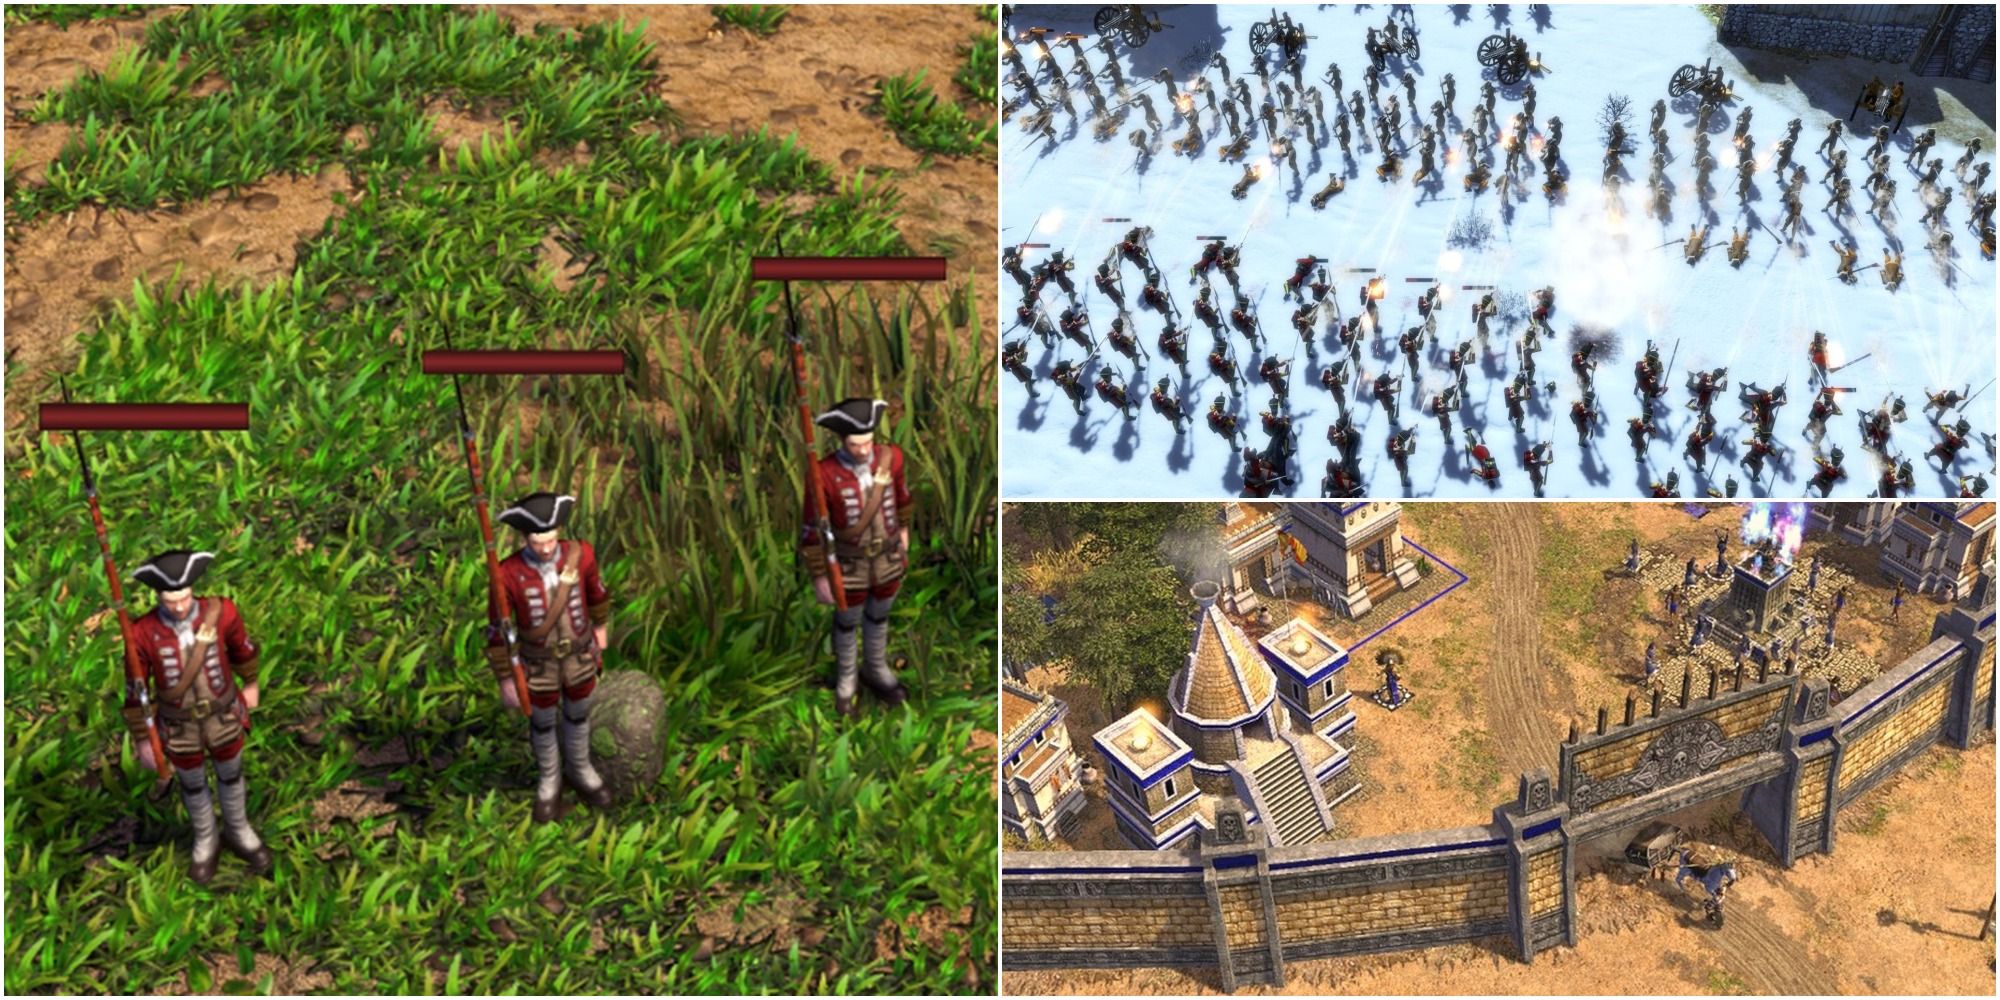 age of empires definitive edition mods